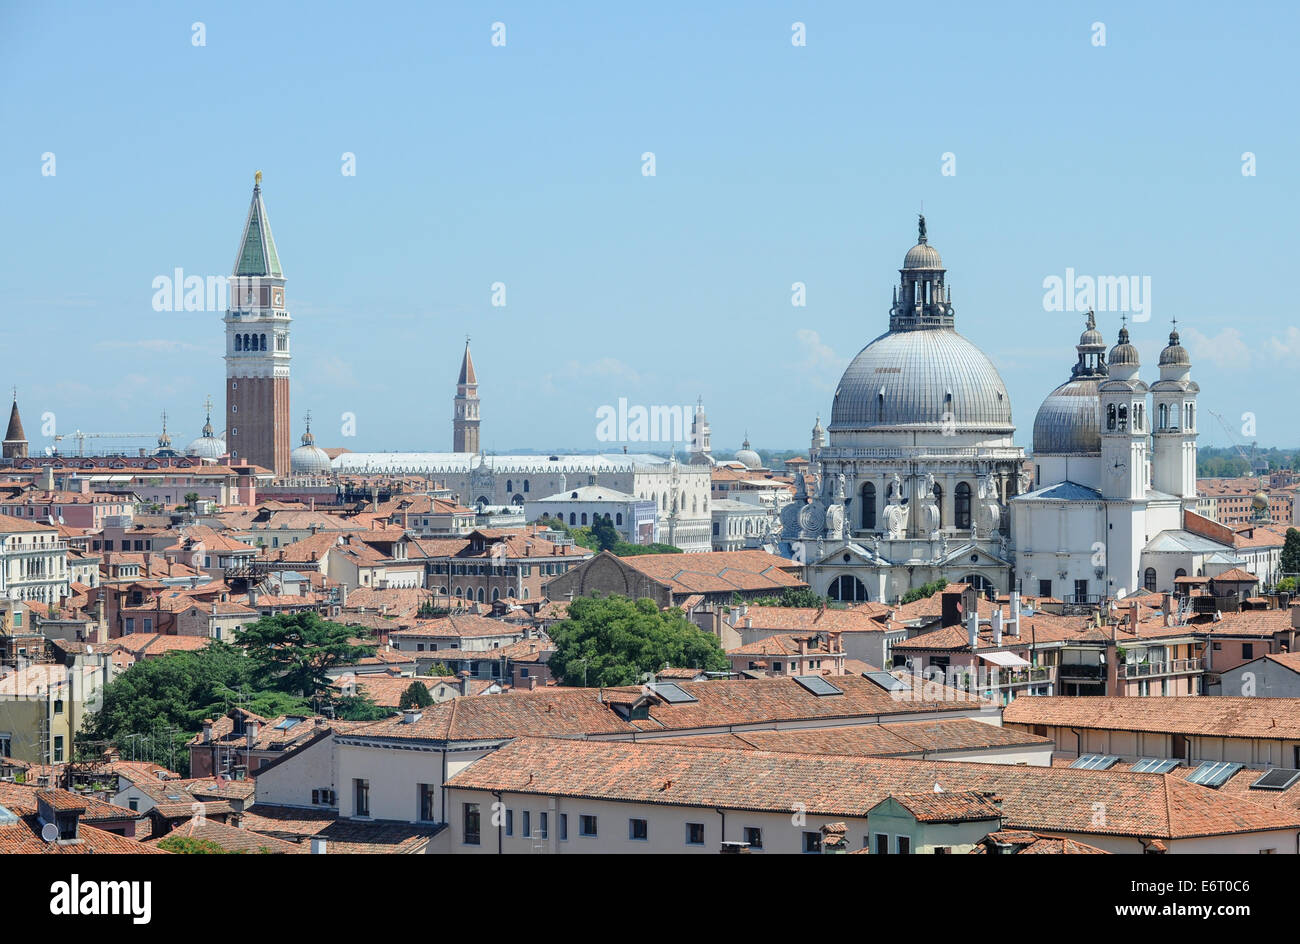 The skyline of Venice towers, Domes and red tiled roofs. Stock Photo